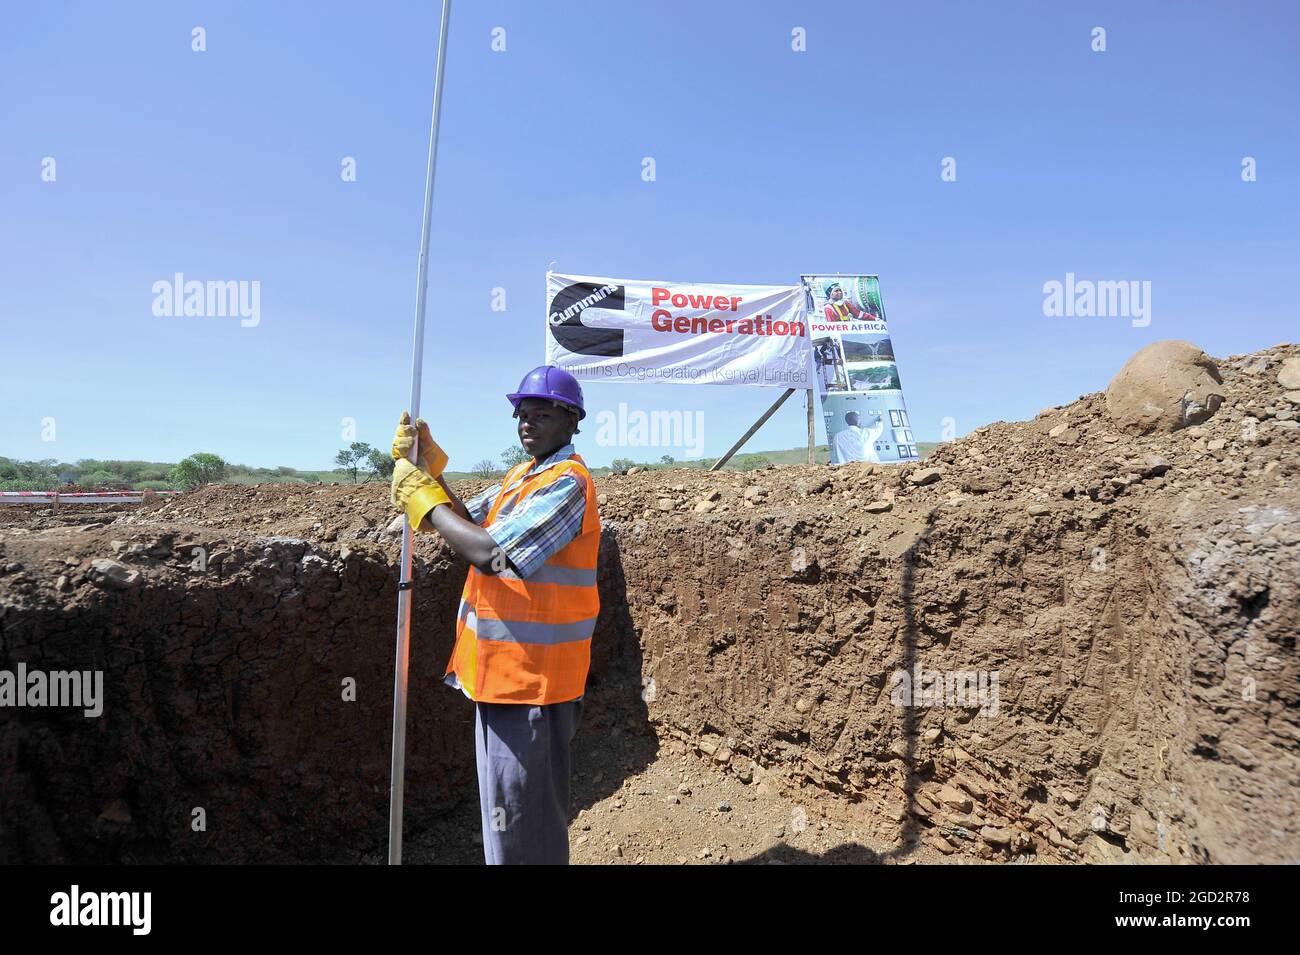 A construction worker in last minute preparations at the project site where the new biomass energy power plant will be built in Marigat, Baringo County Kenya ca. 28 January 2014 Stock Photo